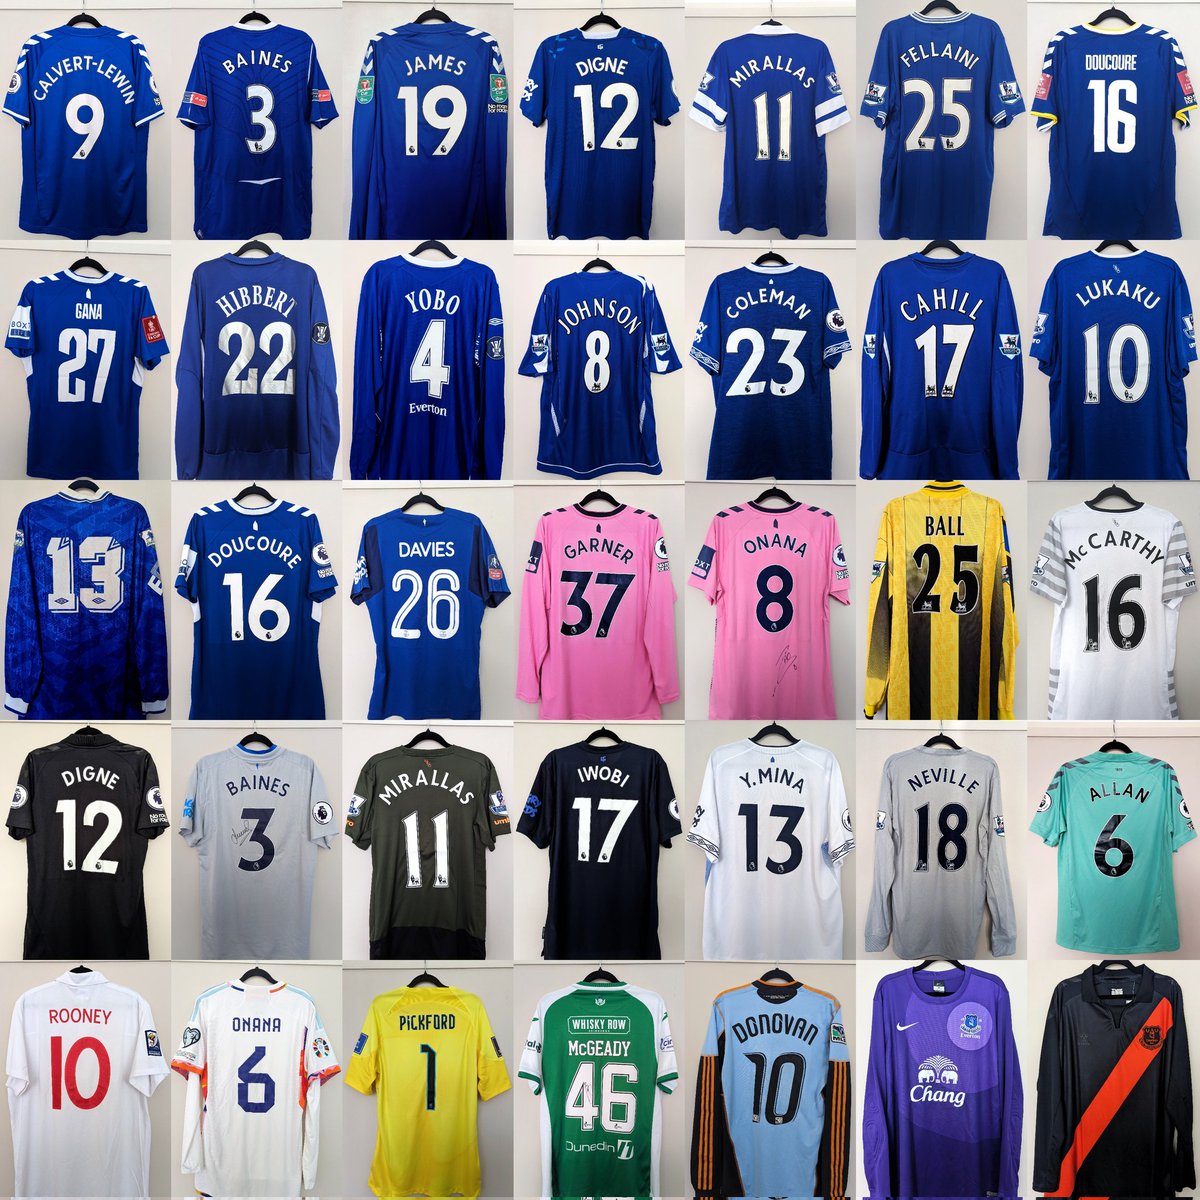 My 2️⃣0️⃣2️⃣3️⃣ additions! Mostly match shirts, all of which are either current or ex-everton players' shirts 👌